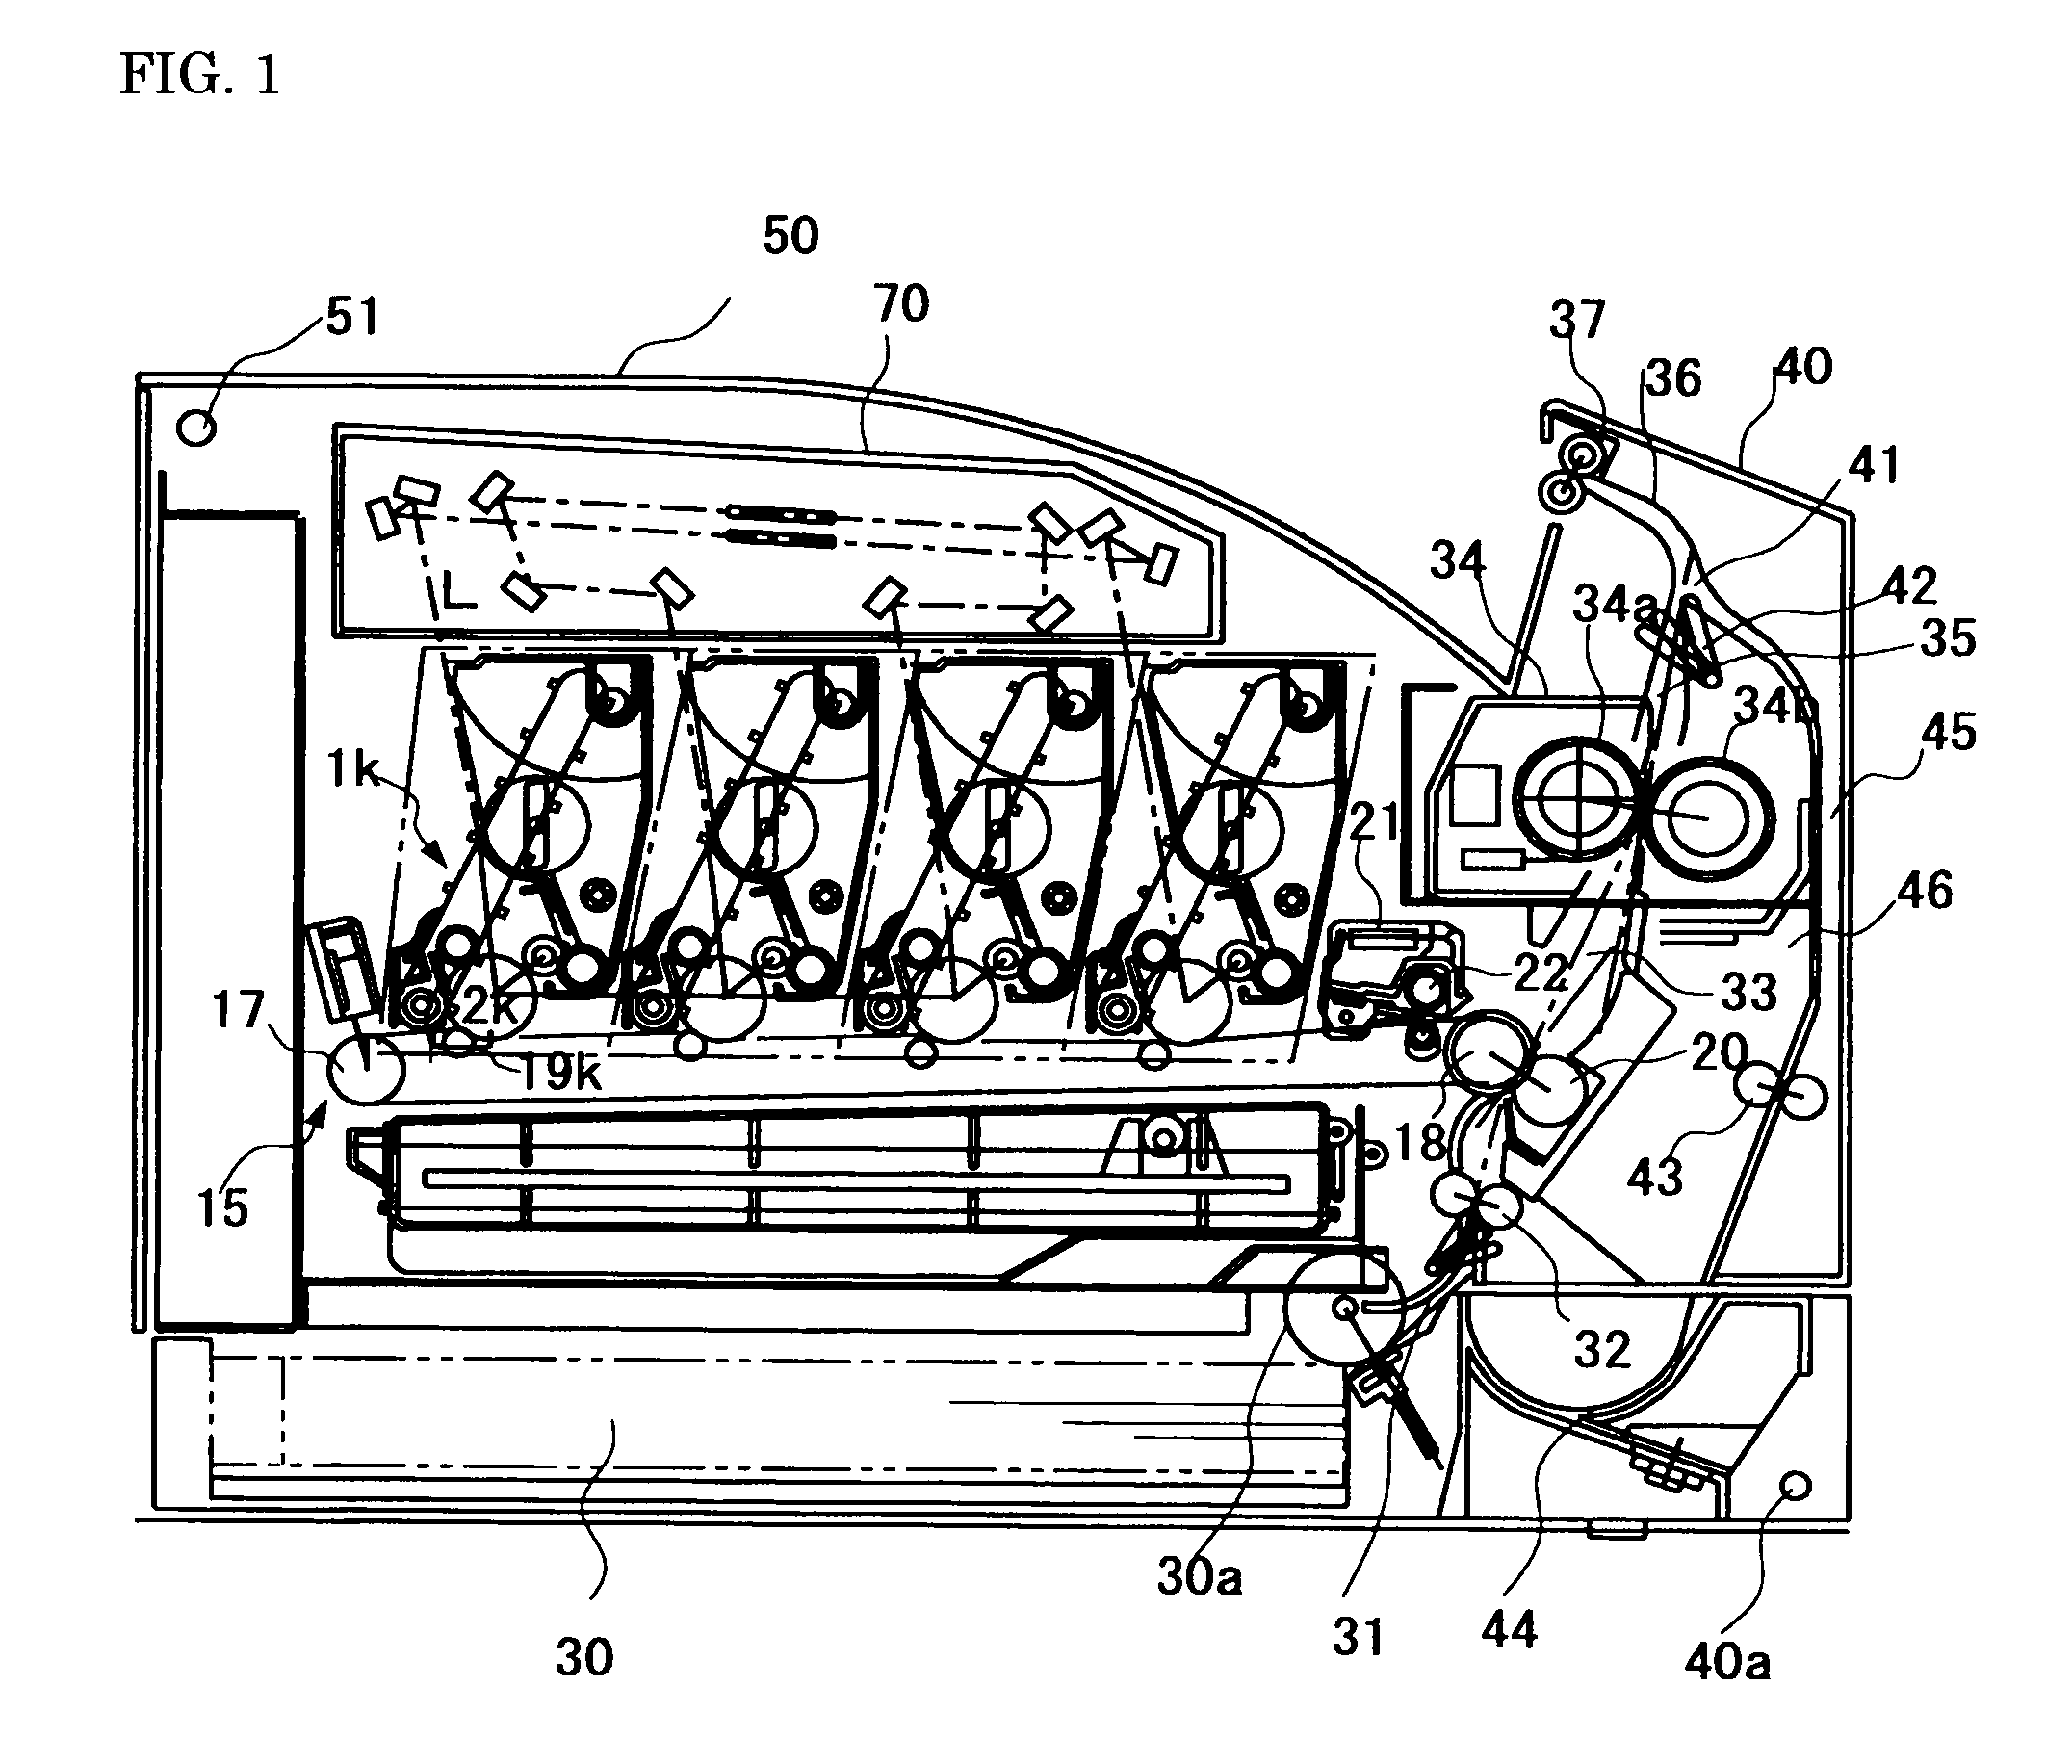 Toner recovery apparatus, process cartridge, and image forming apparatus